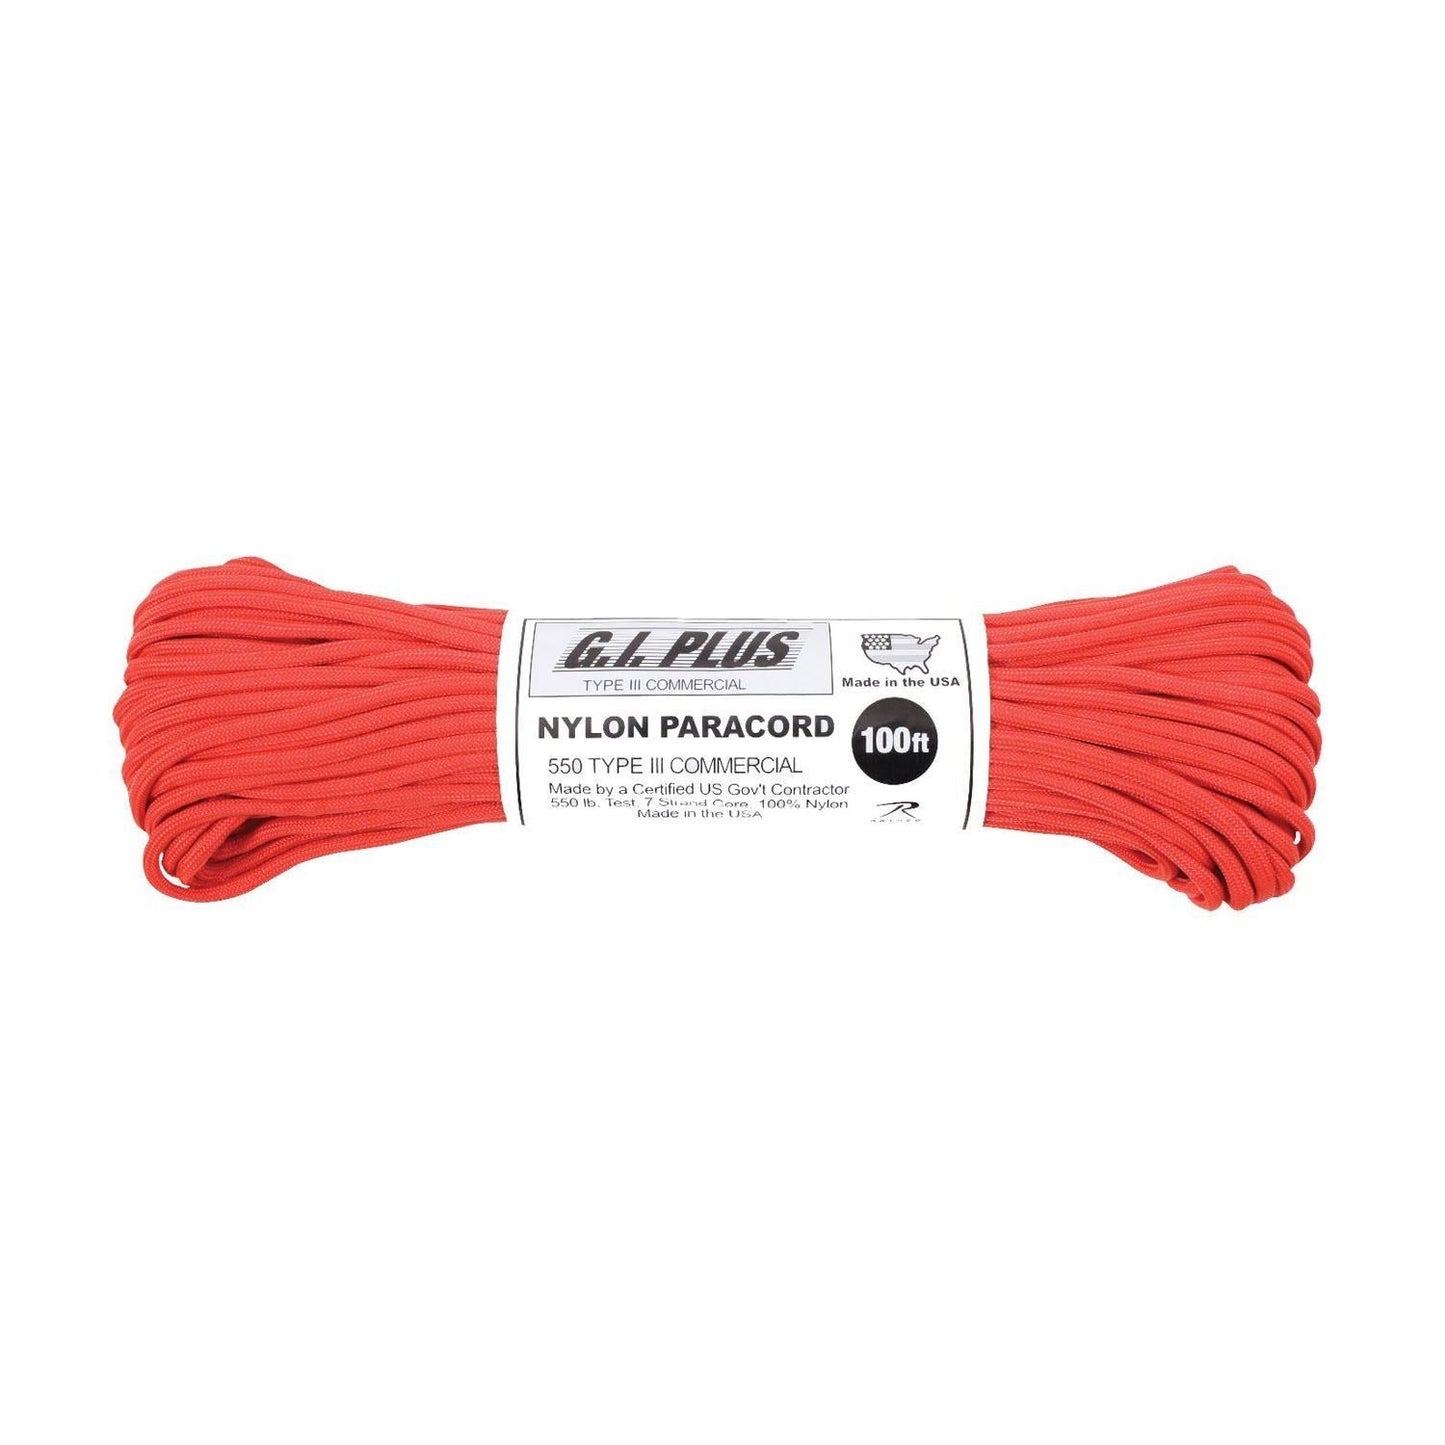 Nylon Paracord - Red 100ft Type III 550 lb. (5 Per Pack)